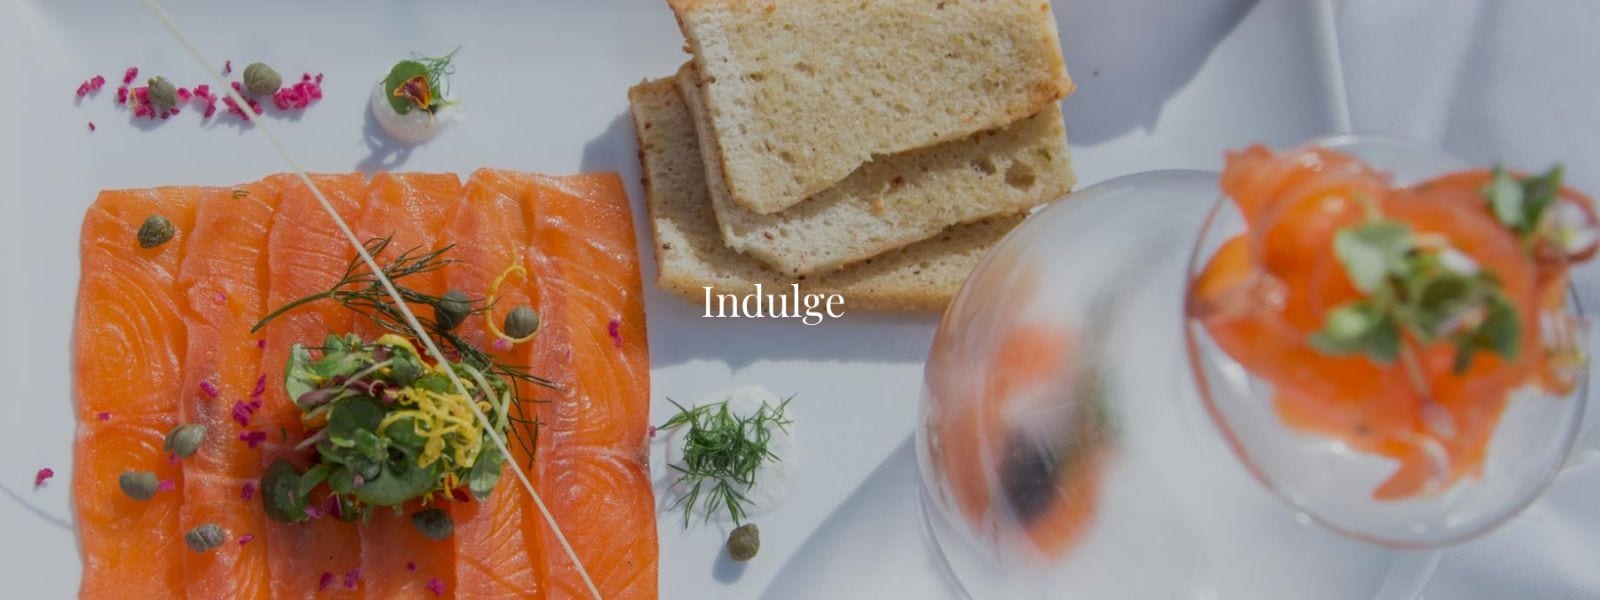 Salmon and bread displayed on a plate with the word Indulge